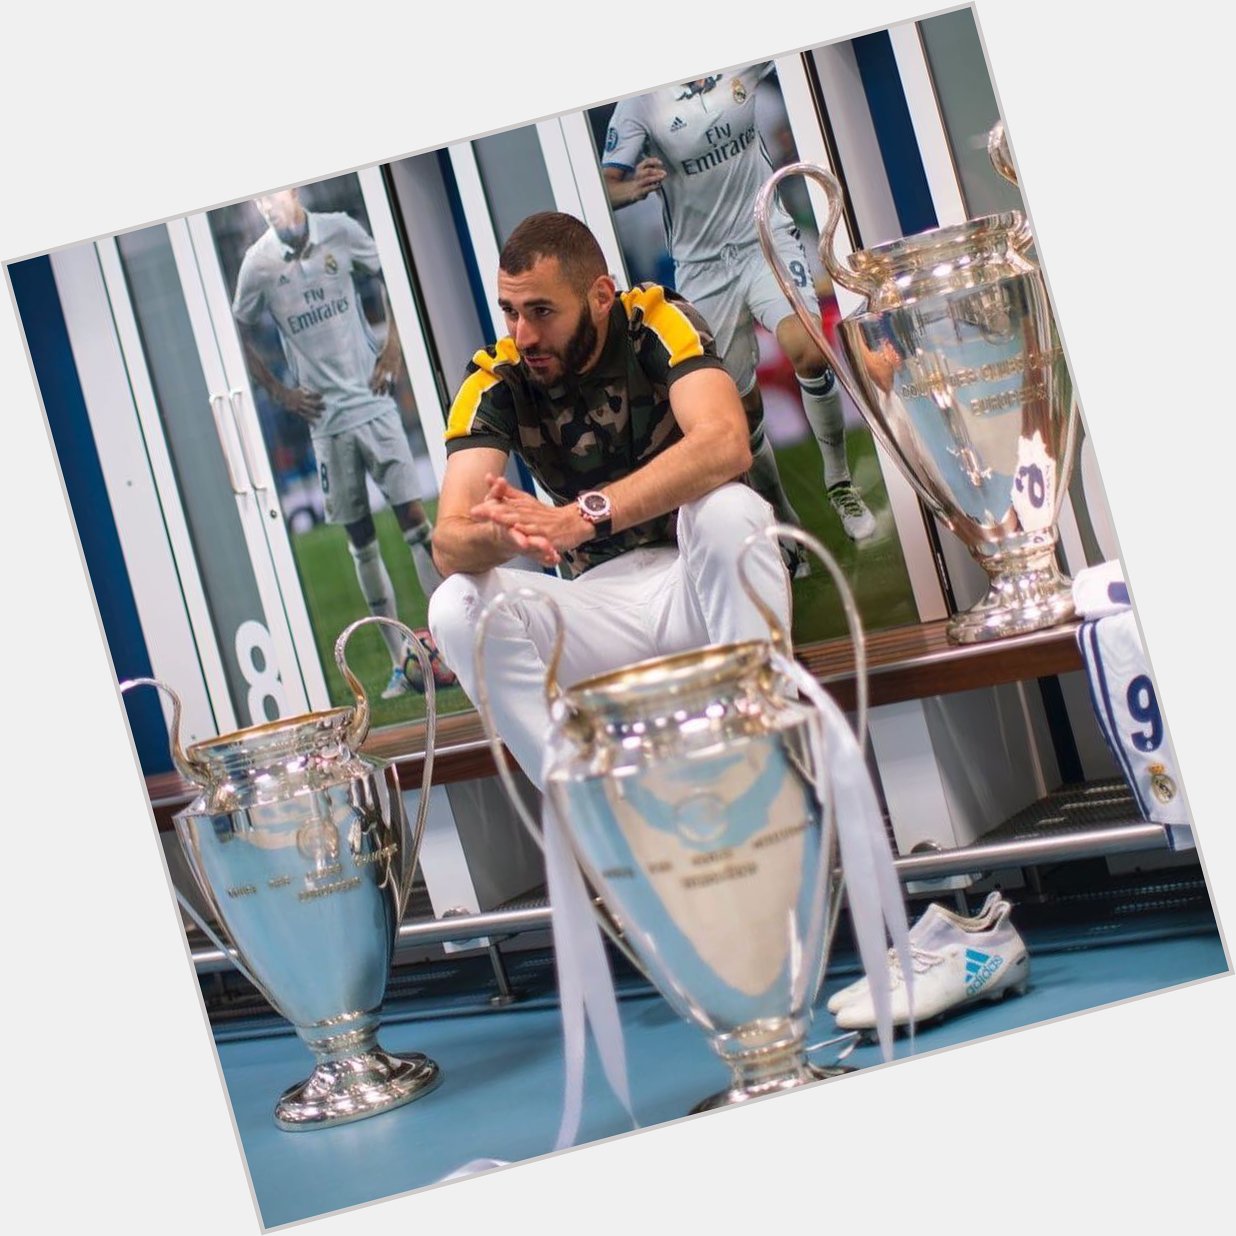 Your striker is not on the same level pal.

Happy Birthday King Karim Benzema 